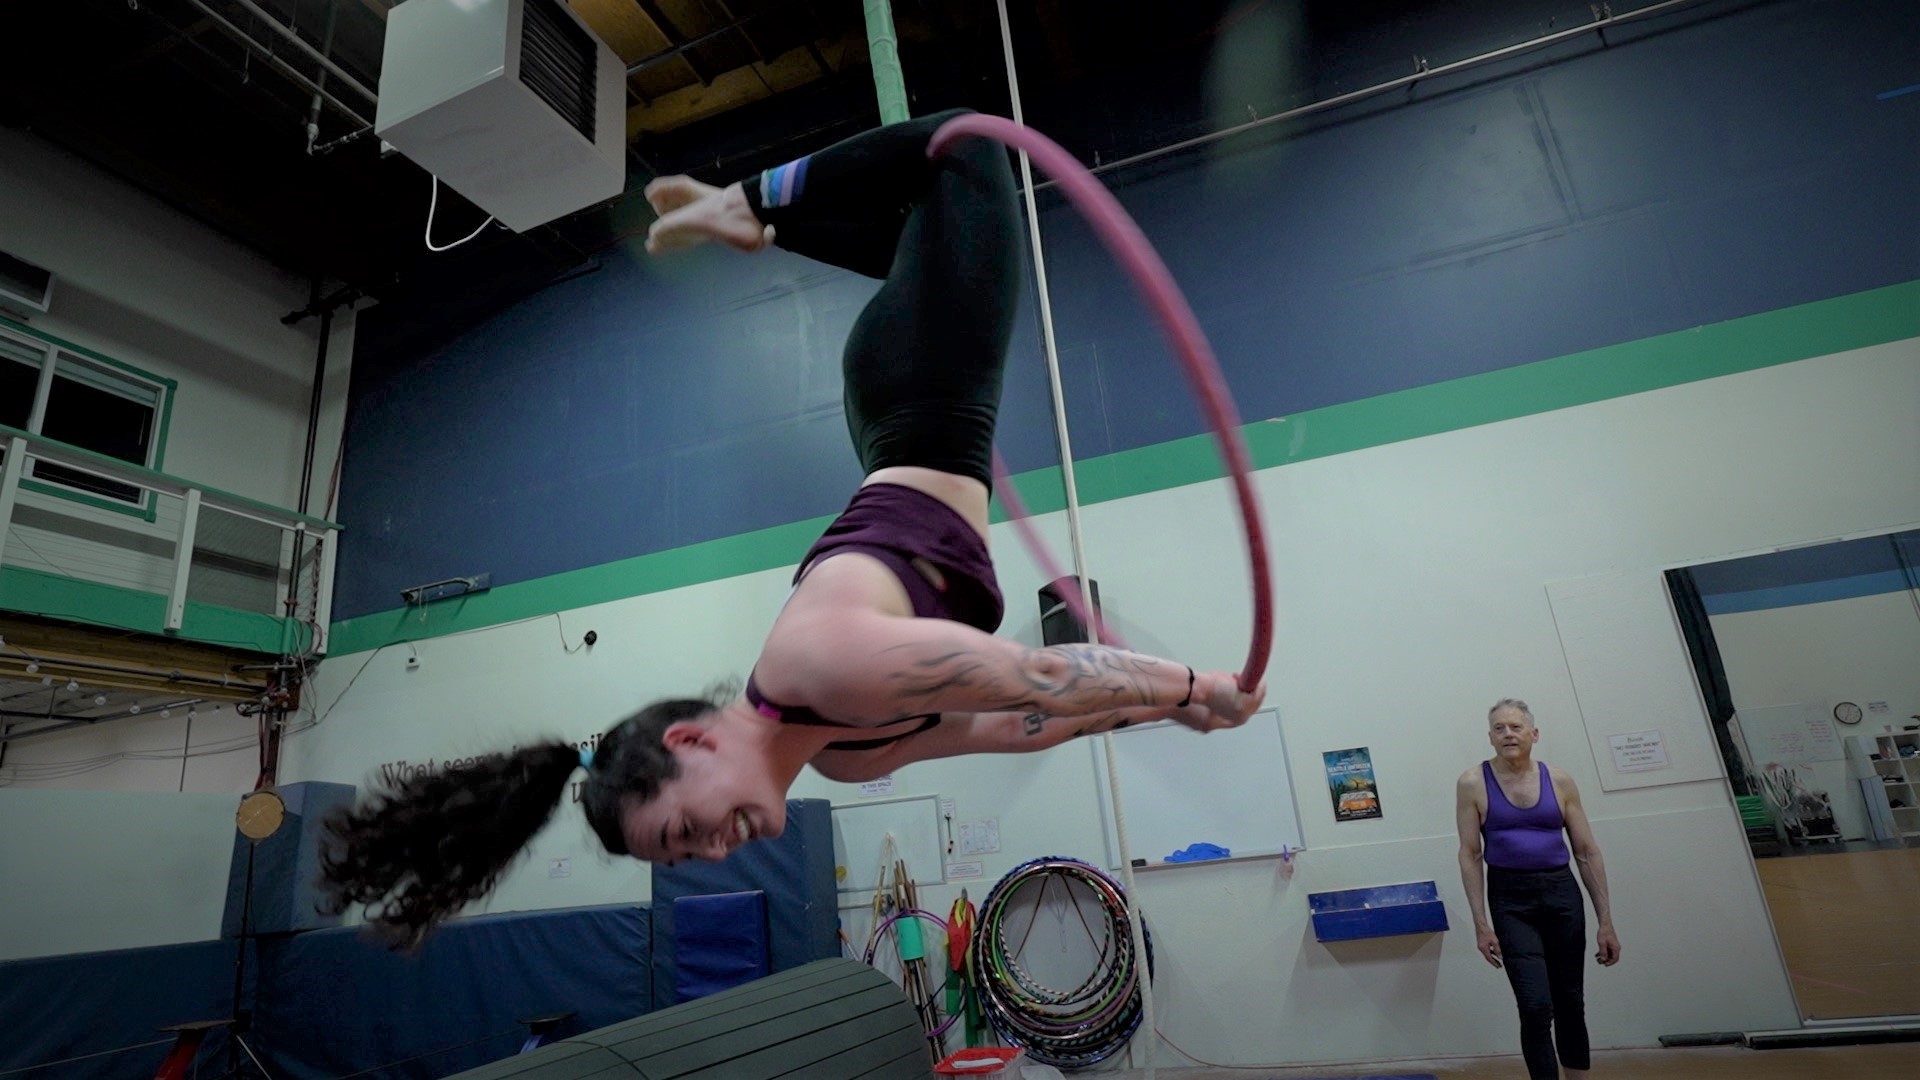 Georgetown's School of Acrobatics and New Circus Arts (SANCA) offers classes for every age group. #k5evening